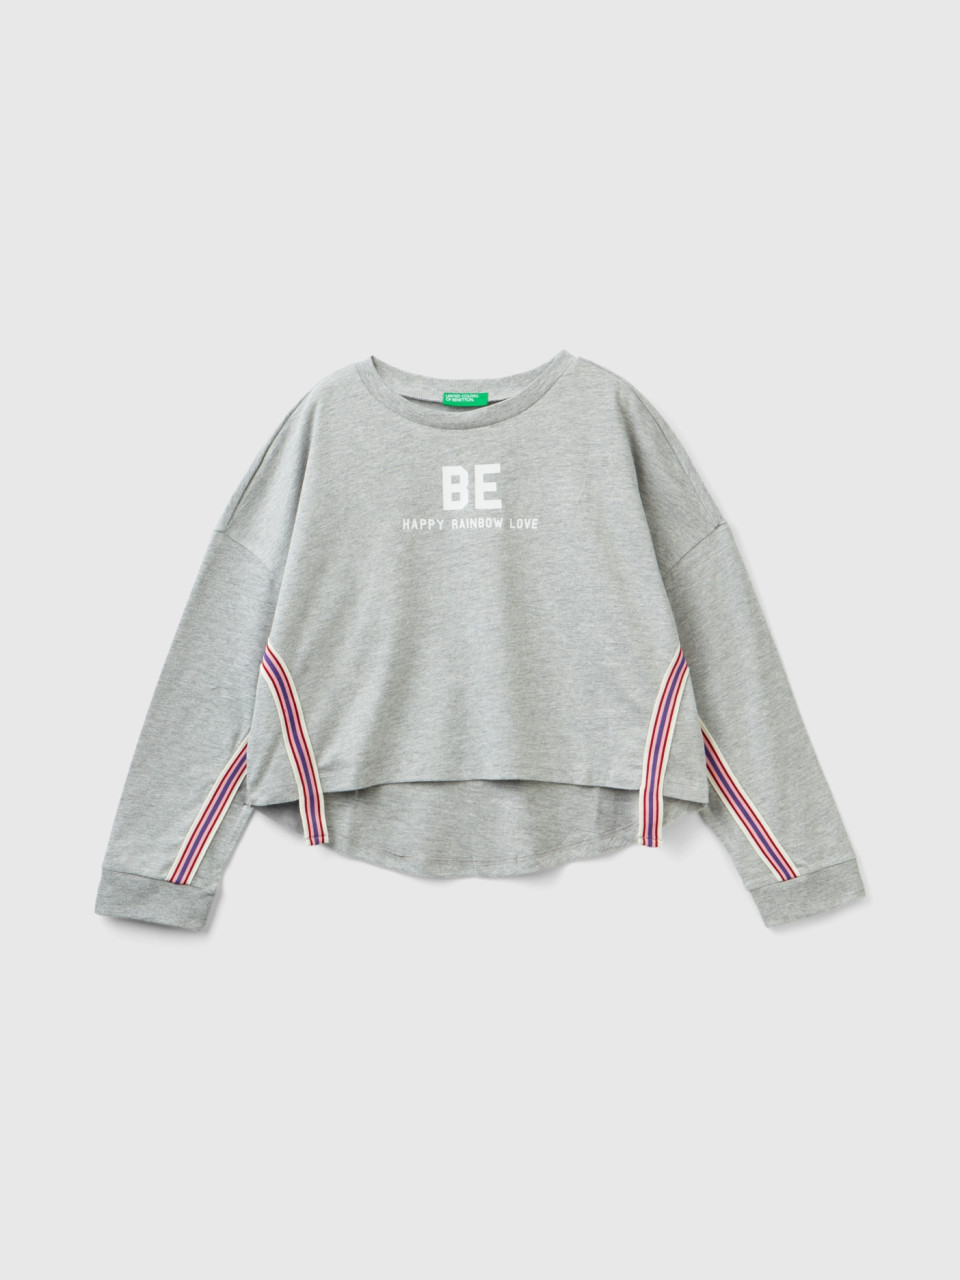 Benetton, Warm T-shirt With be Print, Gray, Kids